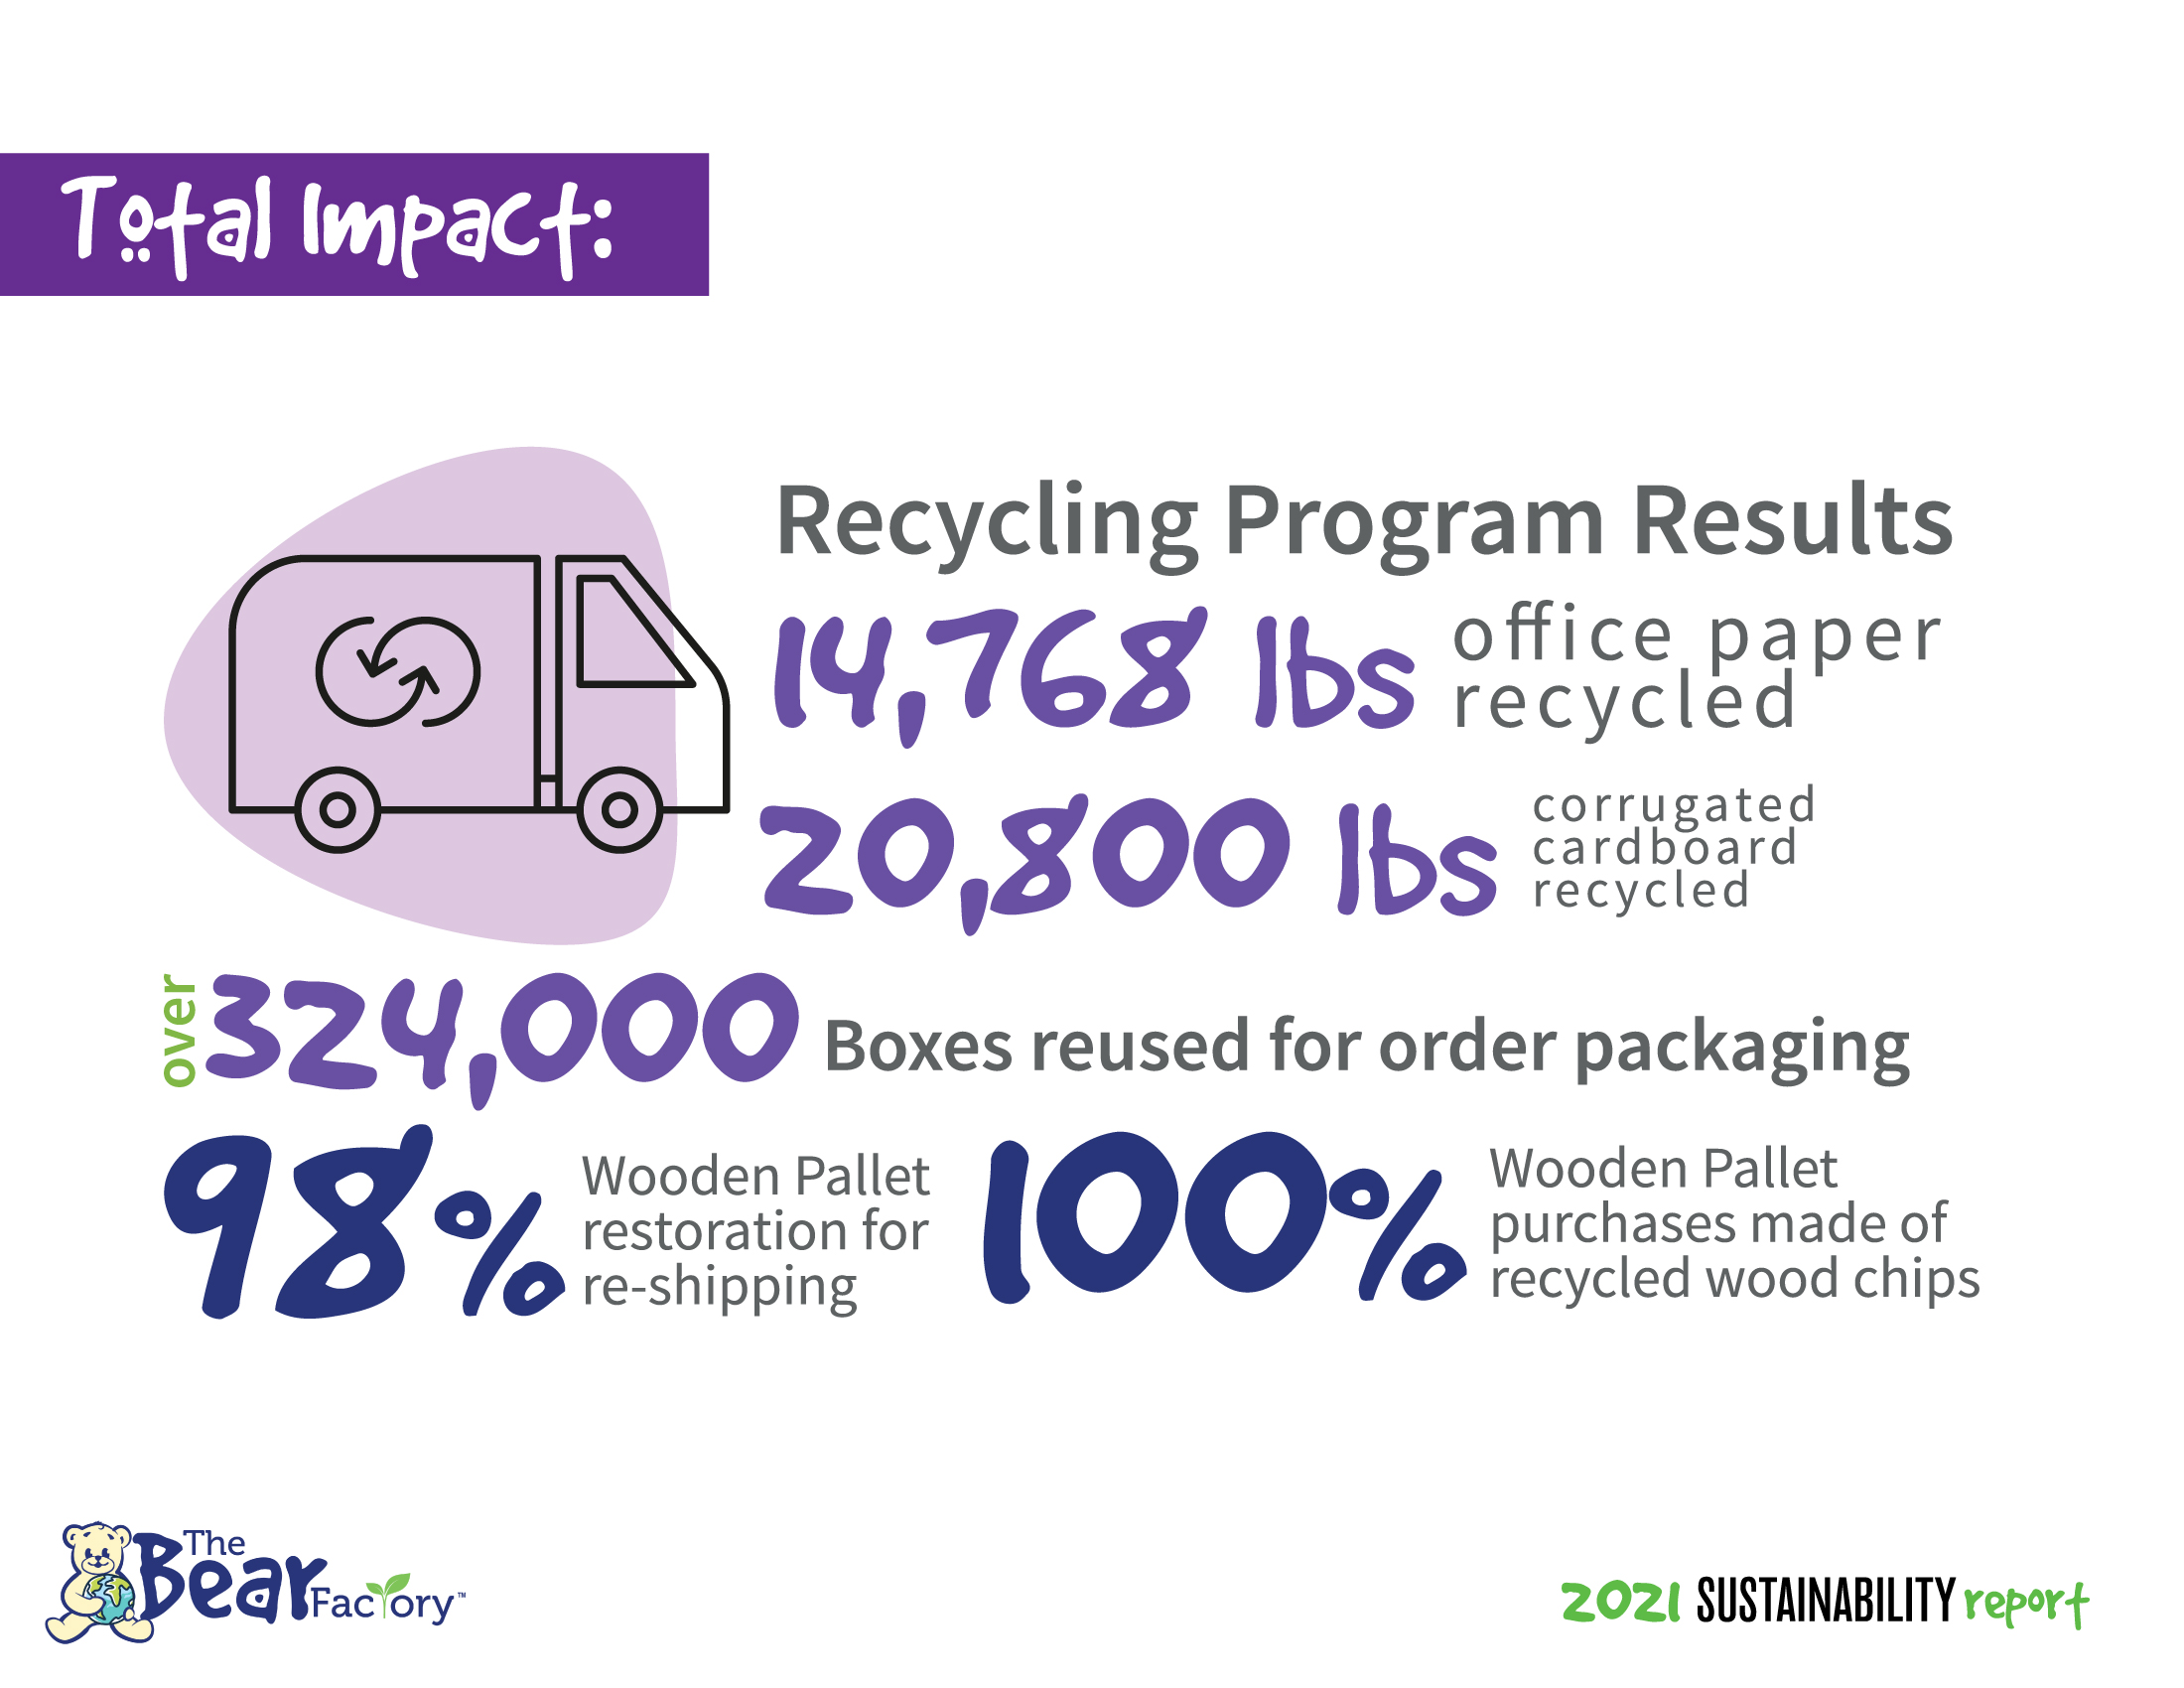 Total Impact: Recycling Program Results office paper 14,768 lbs recycled 20,800 lbs corrugated cardboard recycled 324,000 Boxes reused for order packaging 98% Wooden Pallet restoration for re-shipping 100% Wooden Pallet purchases made of recycled wood chips